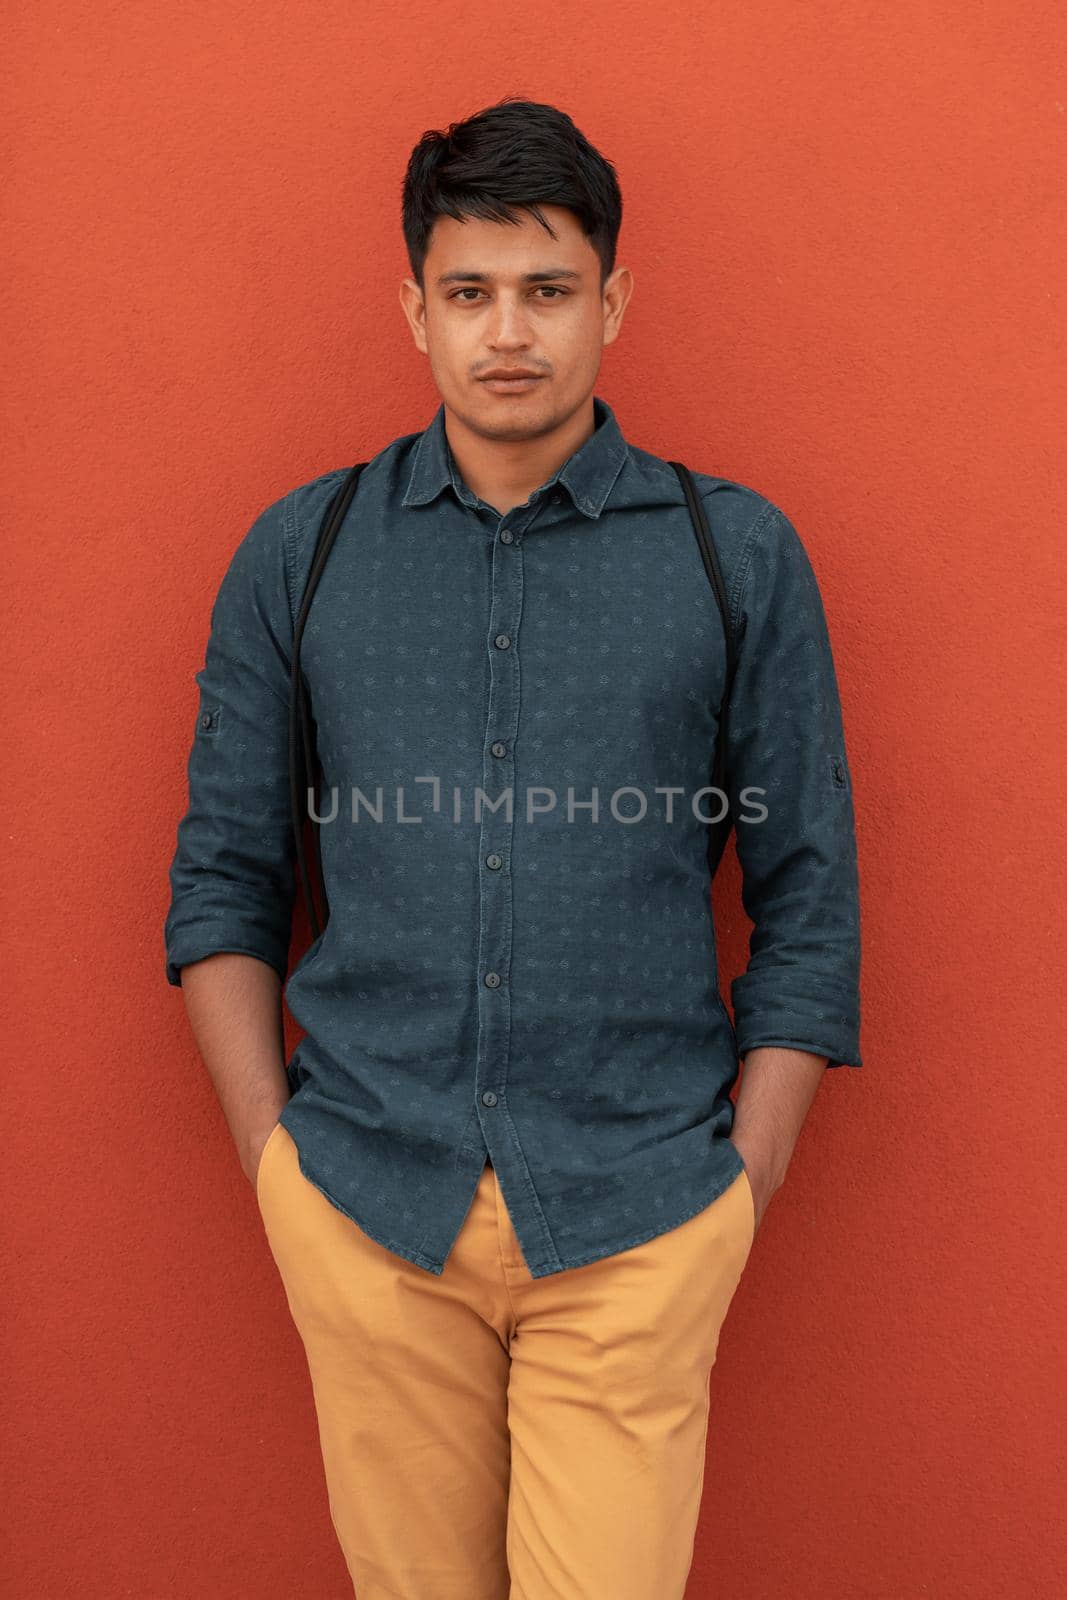 Startup business portrait of casual businessman with a blue shirt and backpack in front of red wall by dotshock